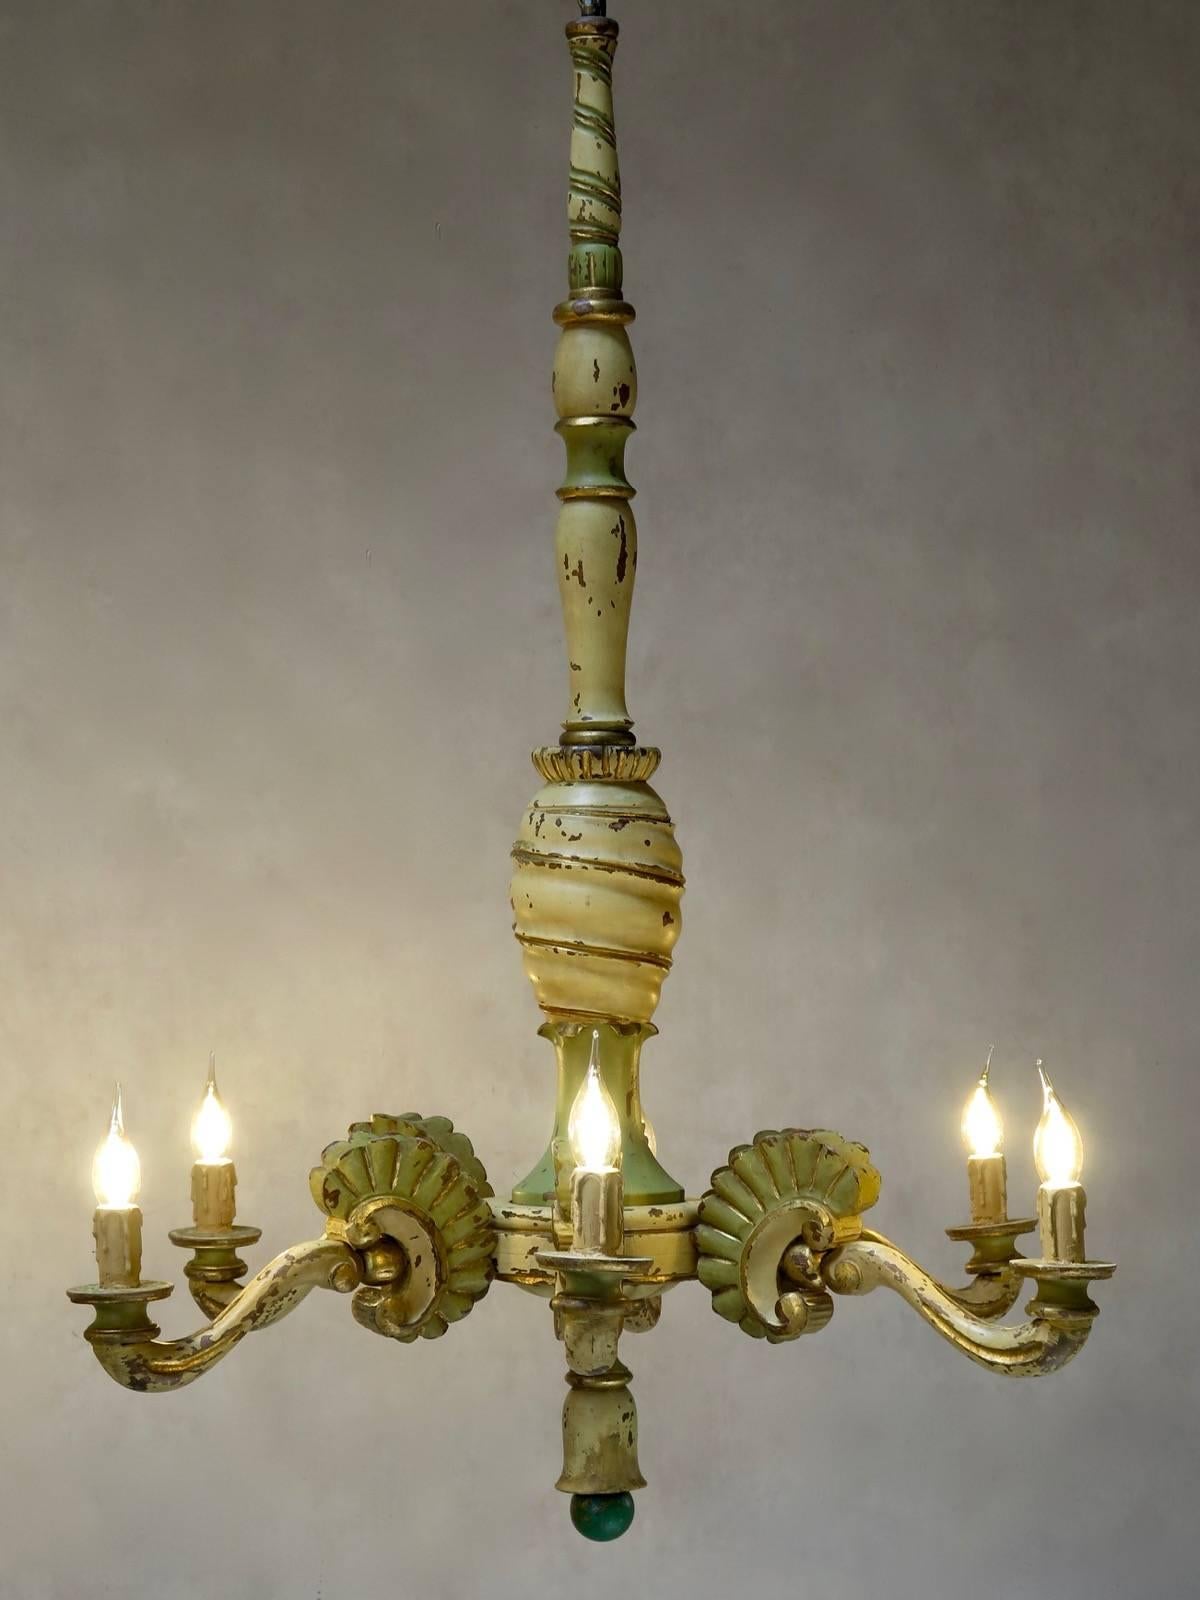 Rare and beautifully-carved wood chandelier, with six arms. With original pale green, cream and gold paint.